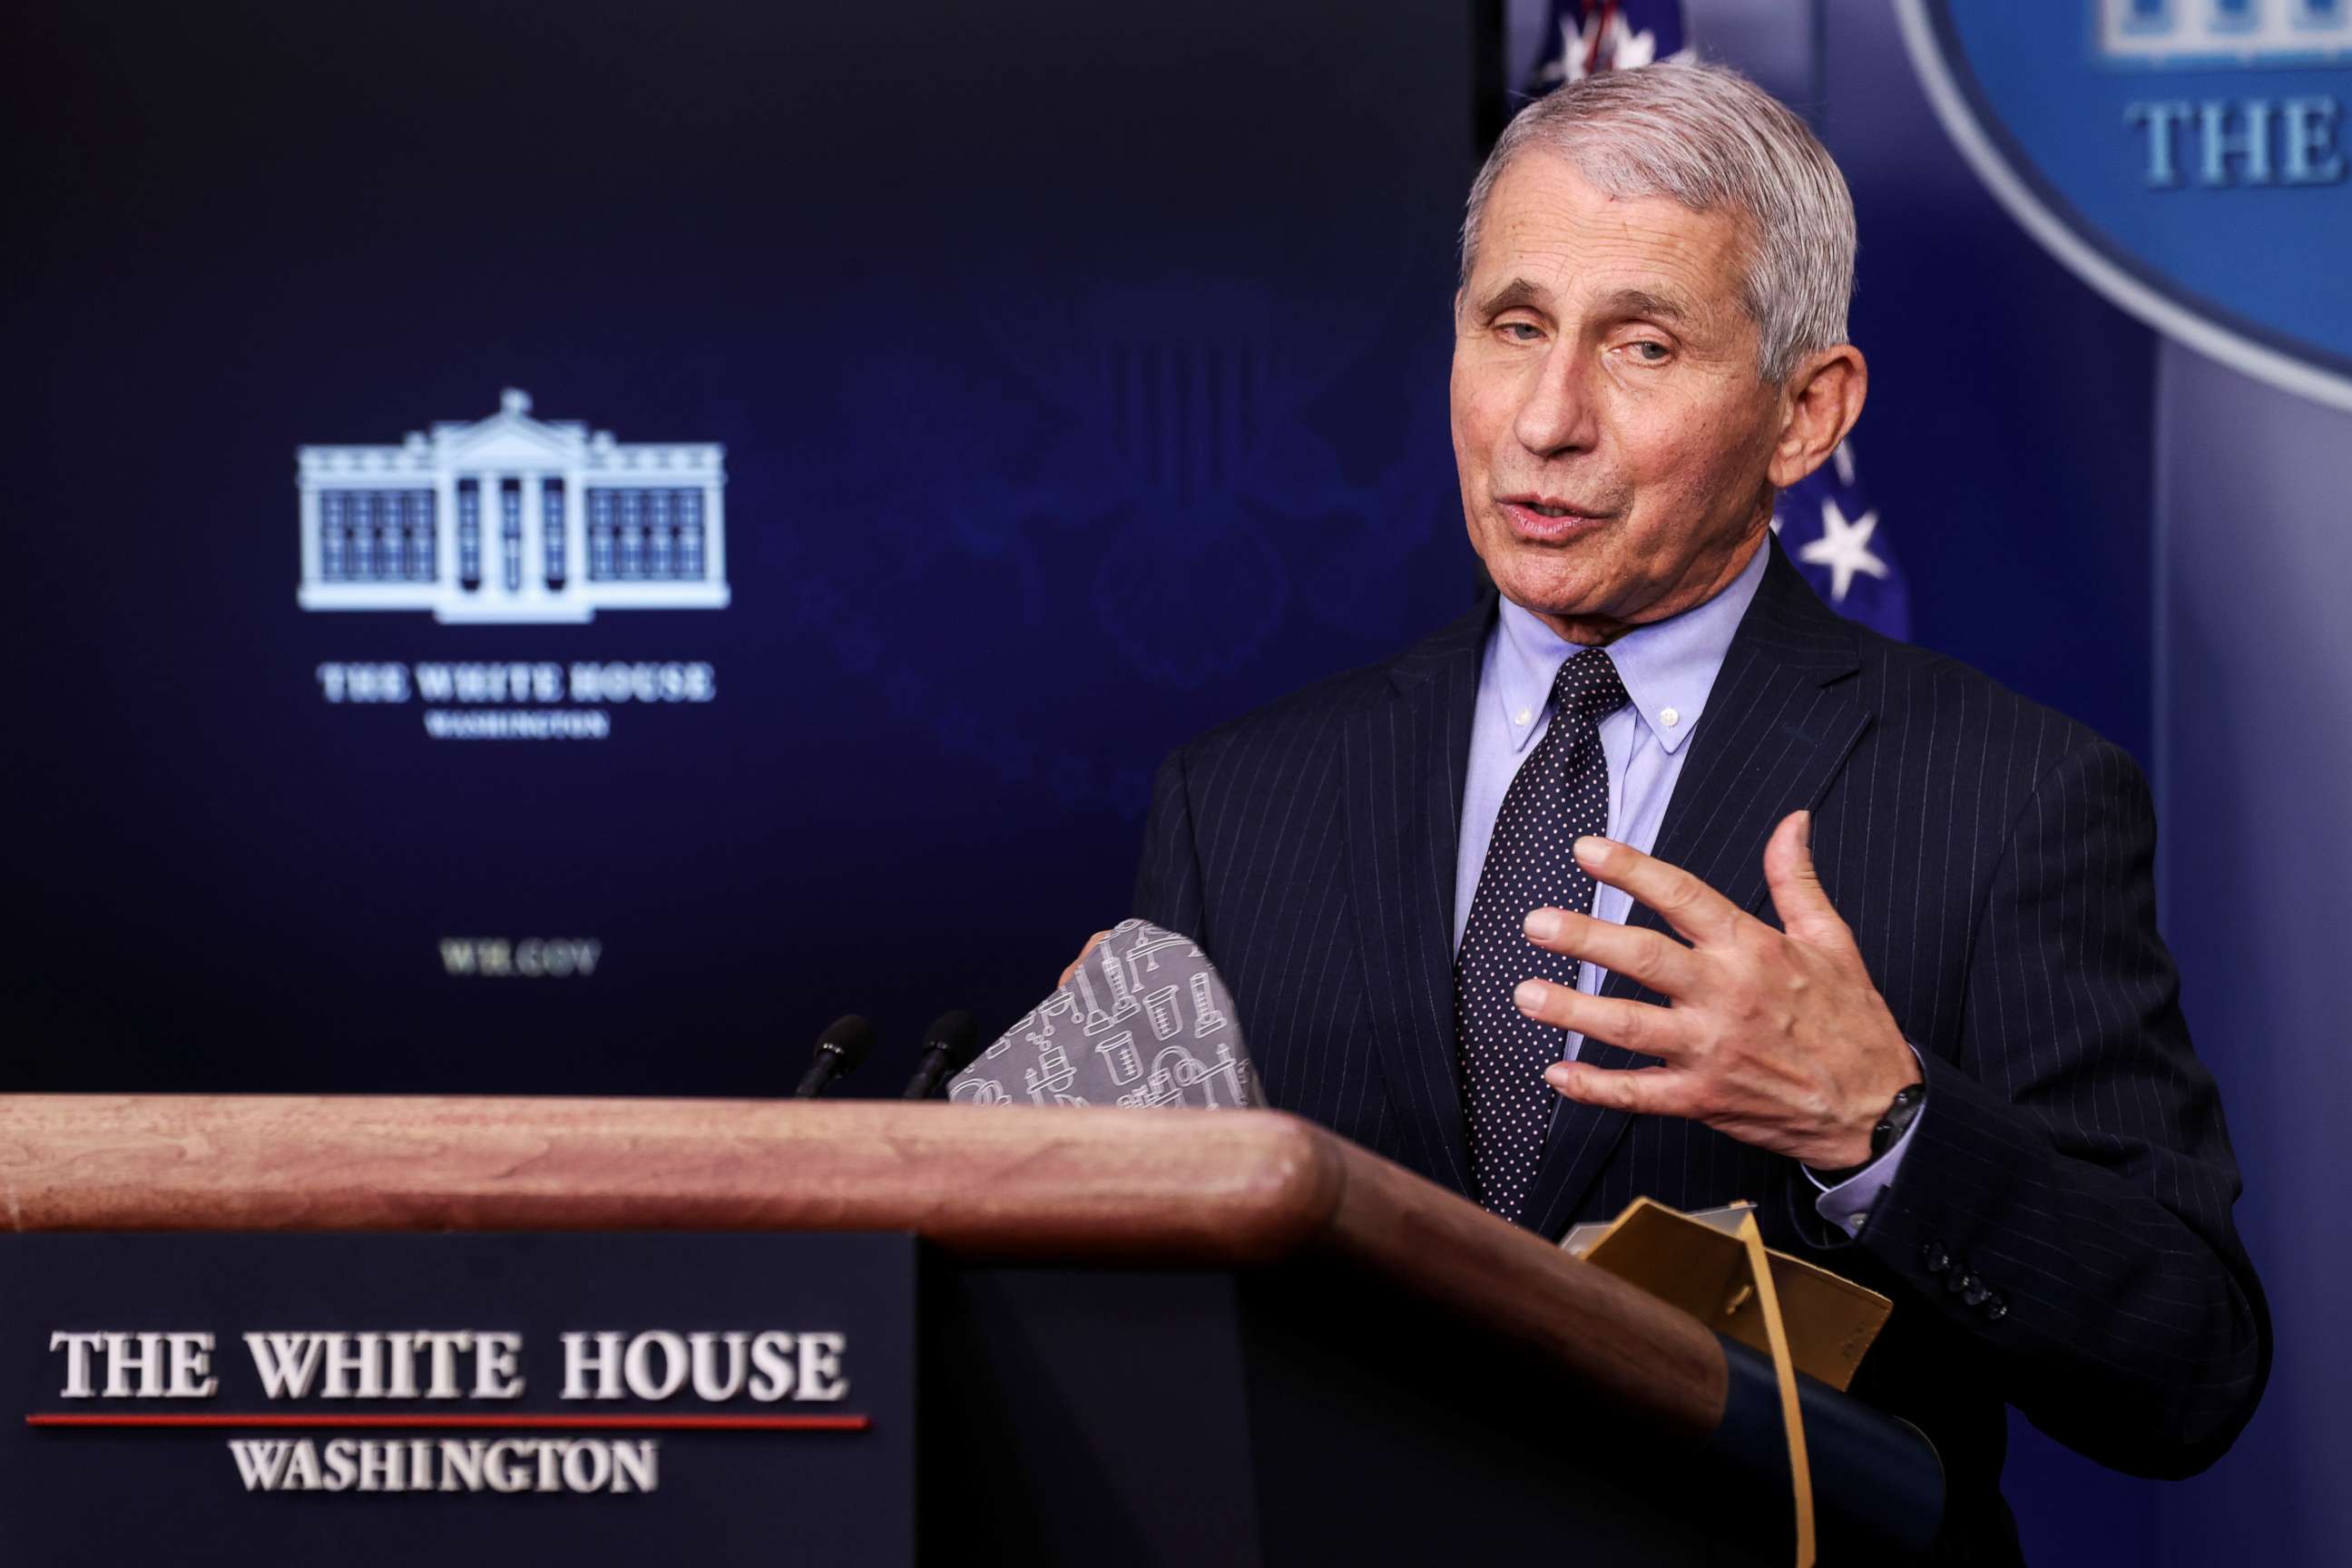 PHOTO: National Institute of Allergy and Infectious Diseases Director Dr. Anthony Fauci addresses reporters at the White House on Jan. 21, 2021.